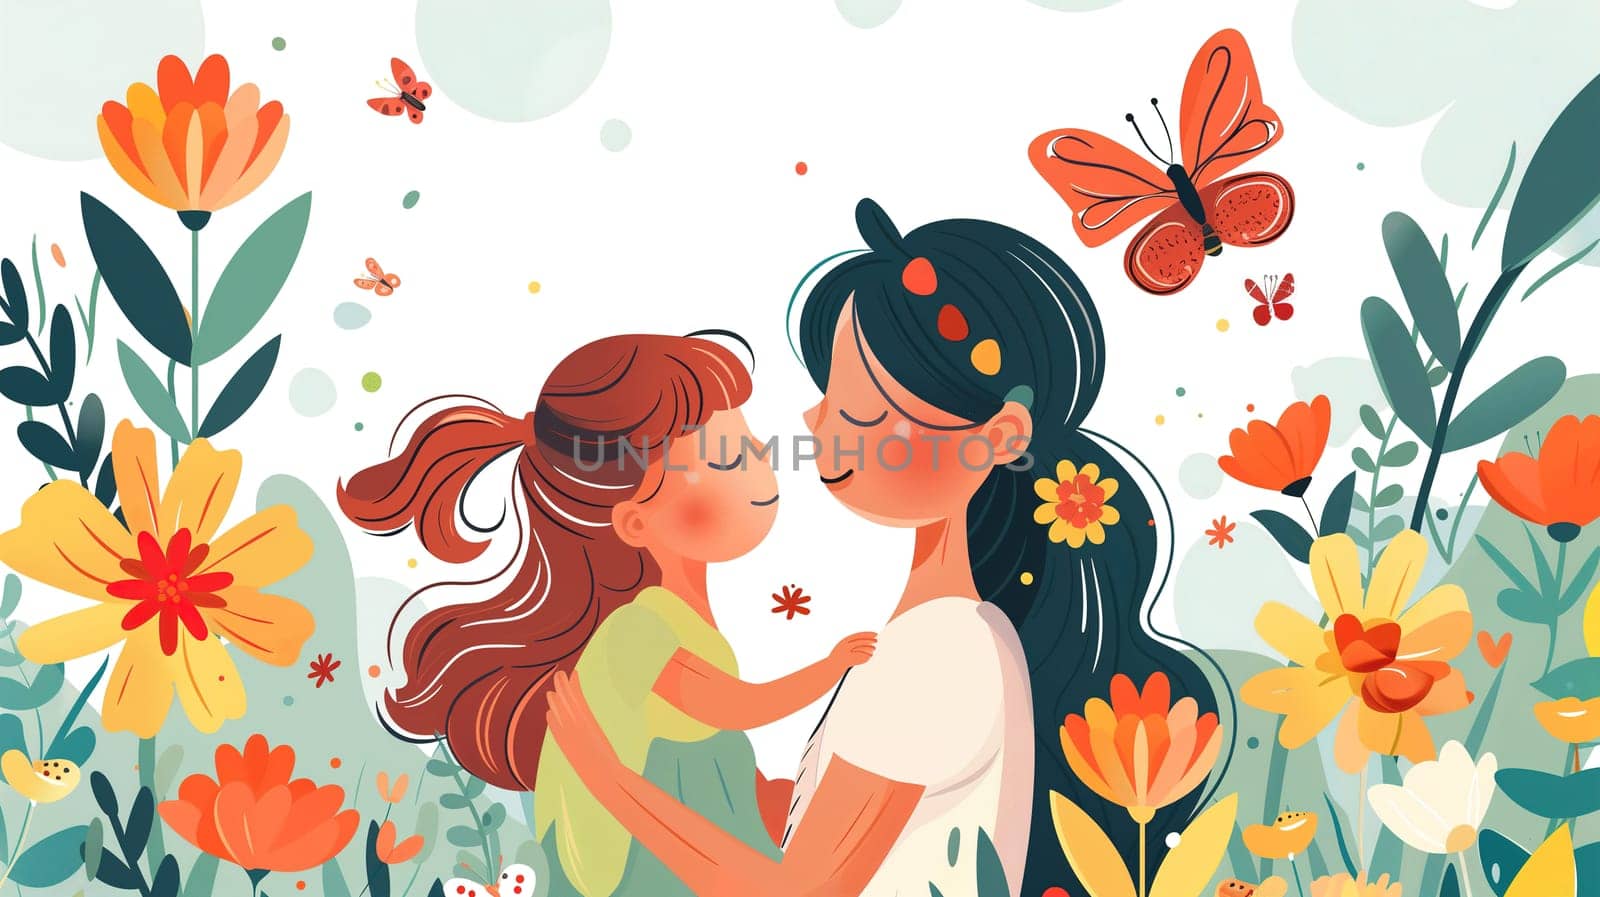 Mother Hugging Daughter in Field of Flowers by TRMK